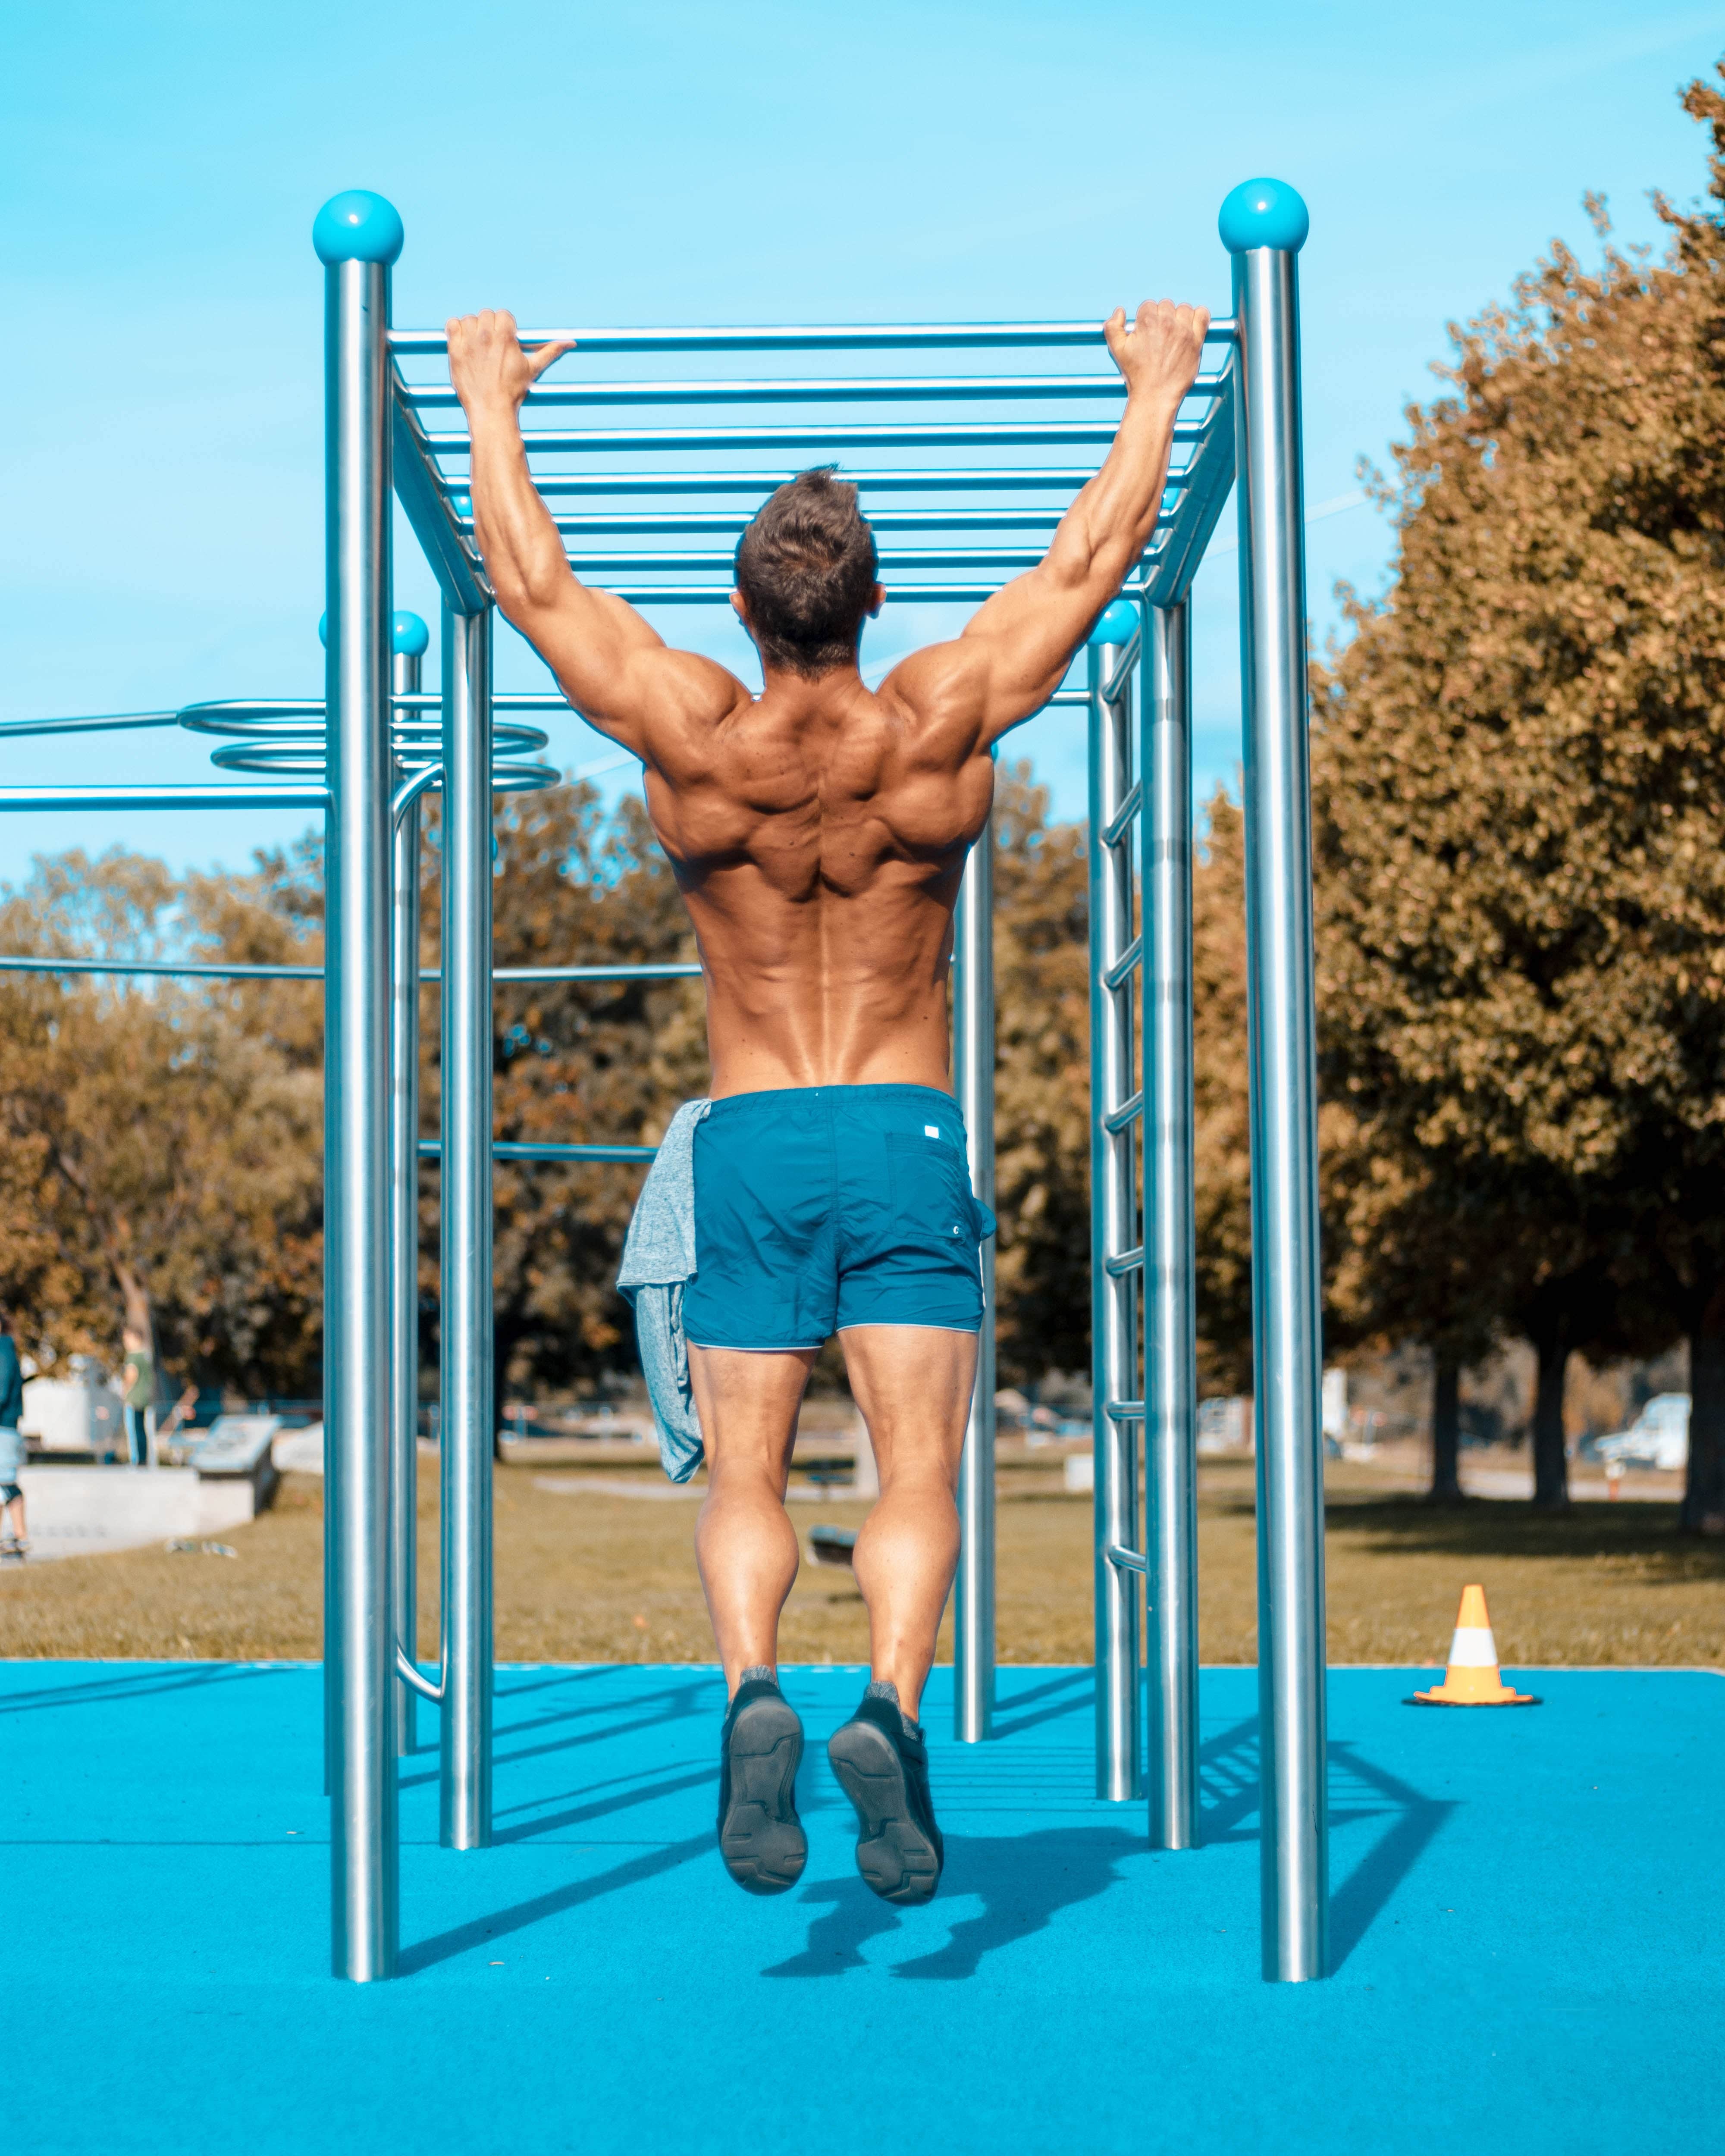 Pull-ups are one of the best exercises that you can do at your home